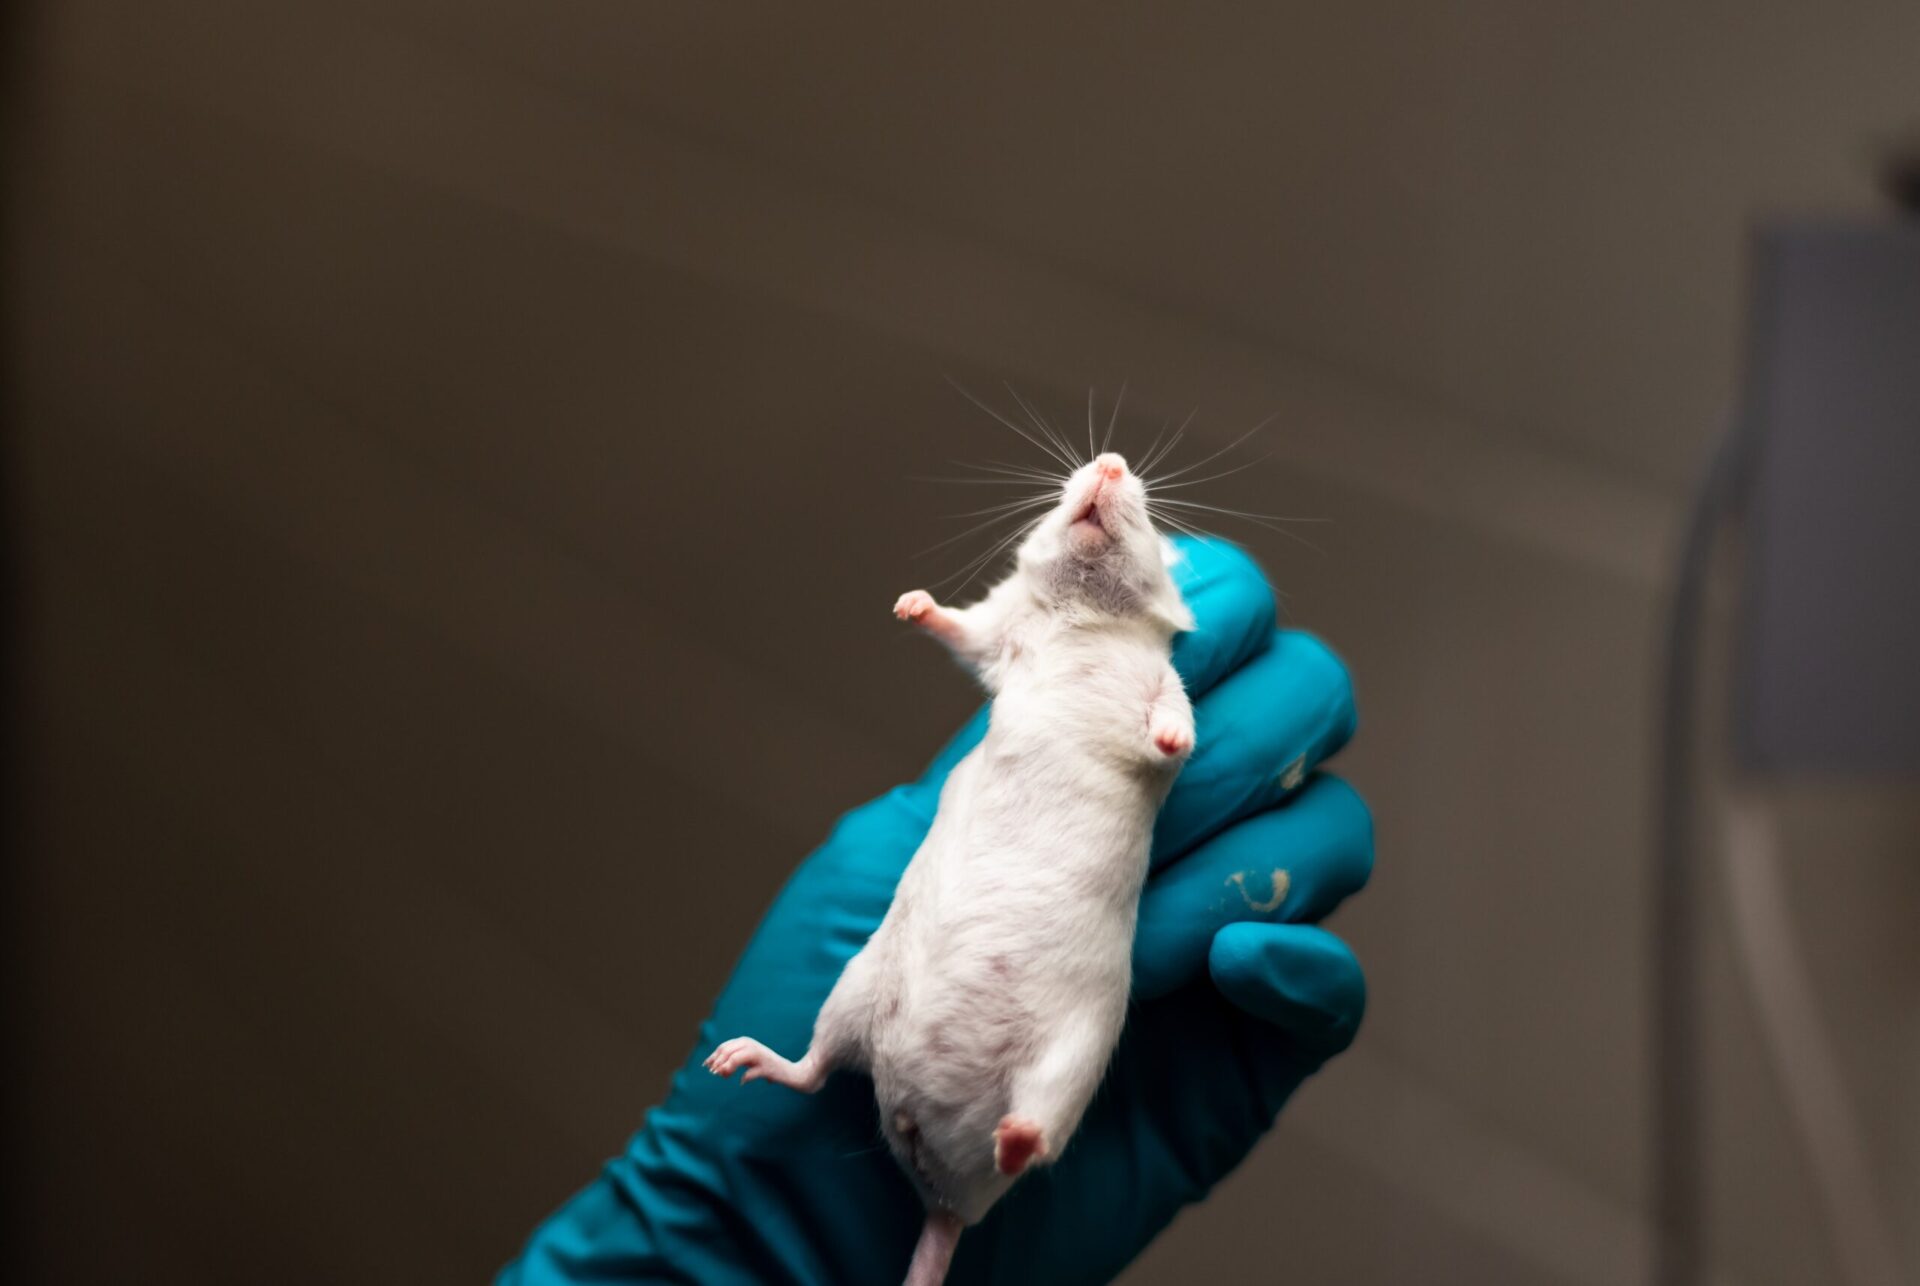 closeup of white mouse which experts theorize may be the originator of the Omicron variant held by gloved hands